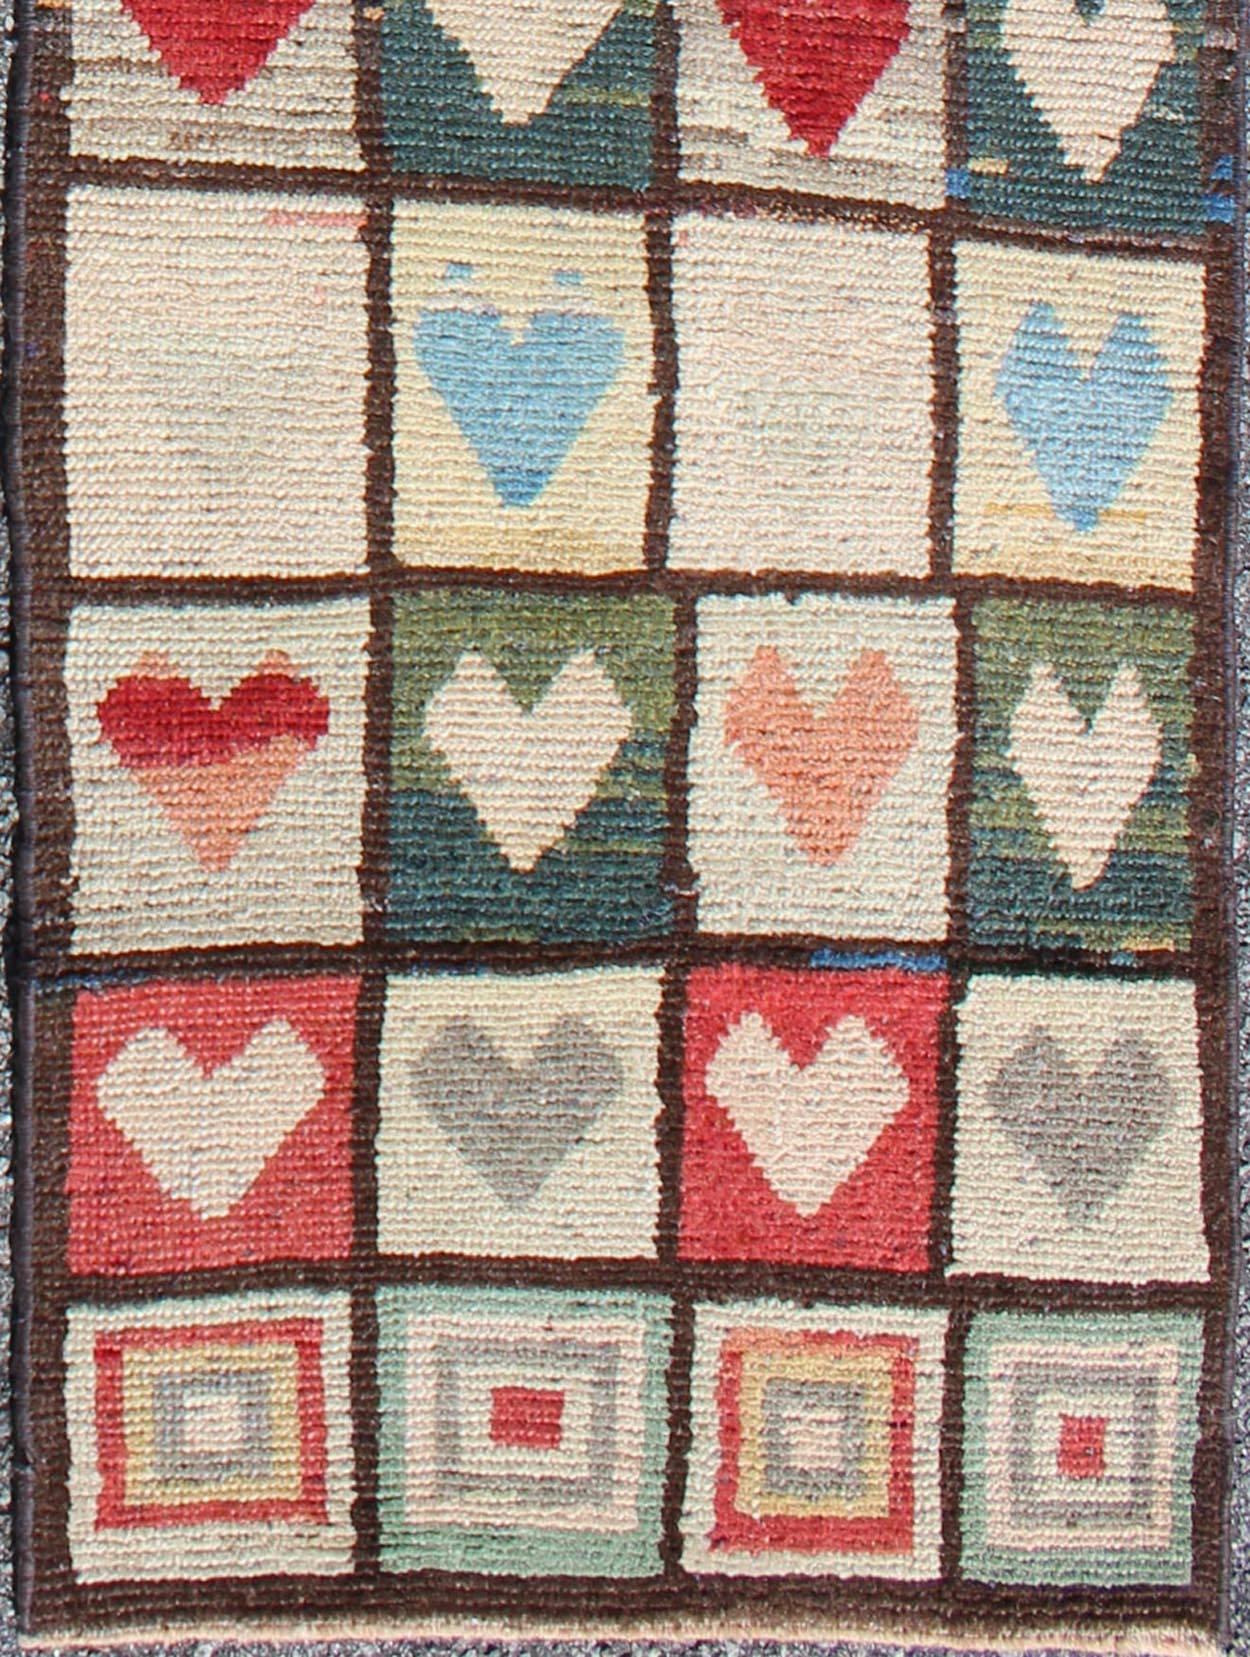 This arty Tulu boasts a unique heart-shaped pattern. The various tones of light blue, red, gray, pink, forest green, and cream blend superbly to emphasize the exceptional color scheme. The chocolate border transitions to a lighter brown tone along